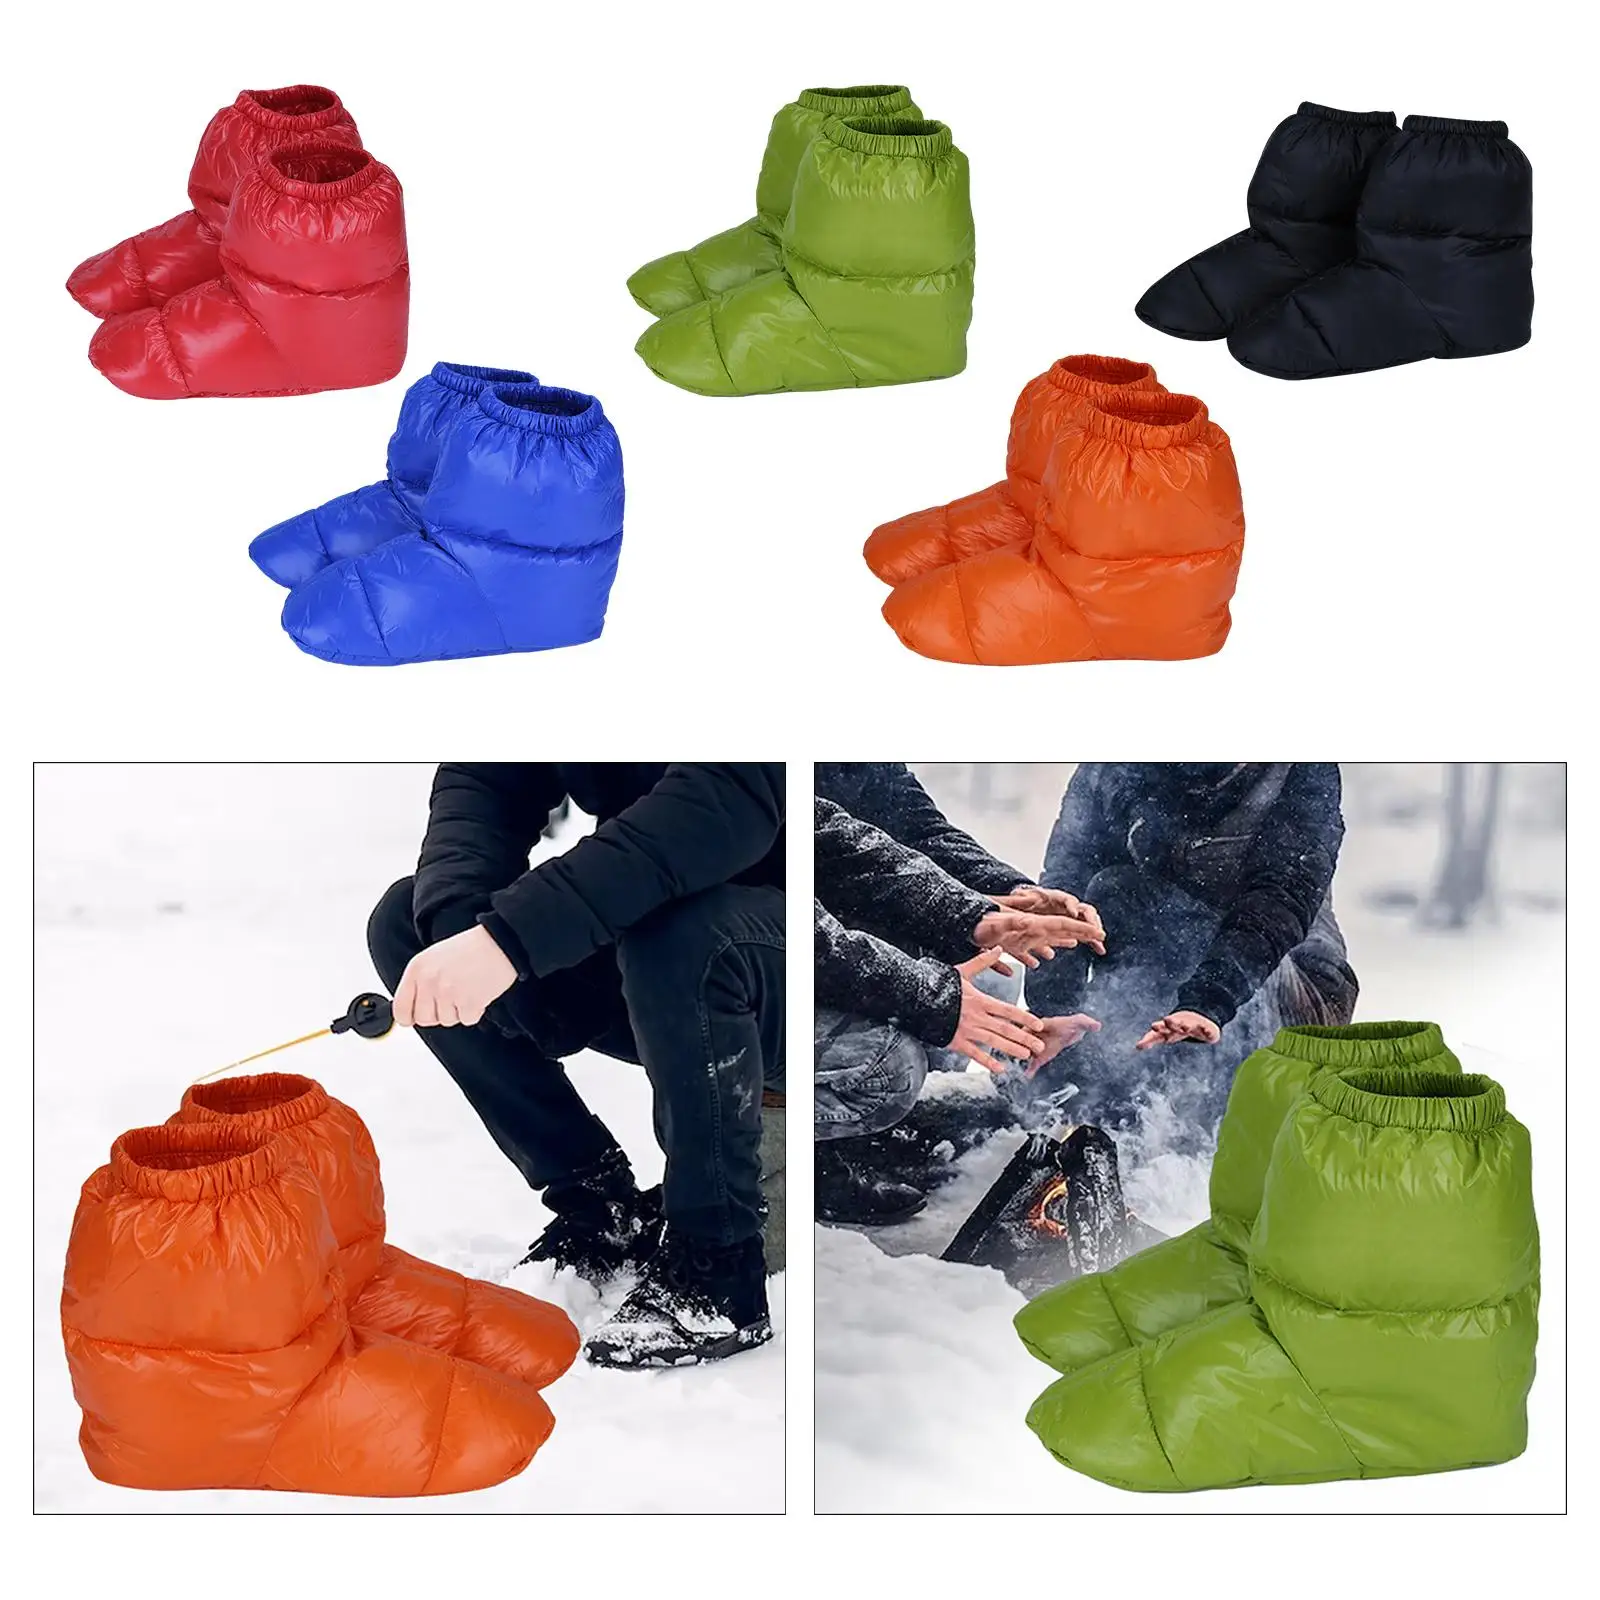 1 Pair Winter Down Slippers Bootie Shoes Waterproof Adults Footwear Feet Cover Socks for Office Hiking Camping Indoor Fishing